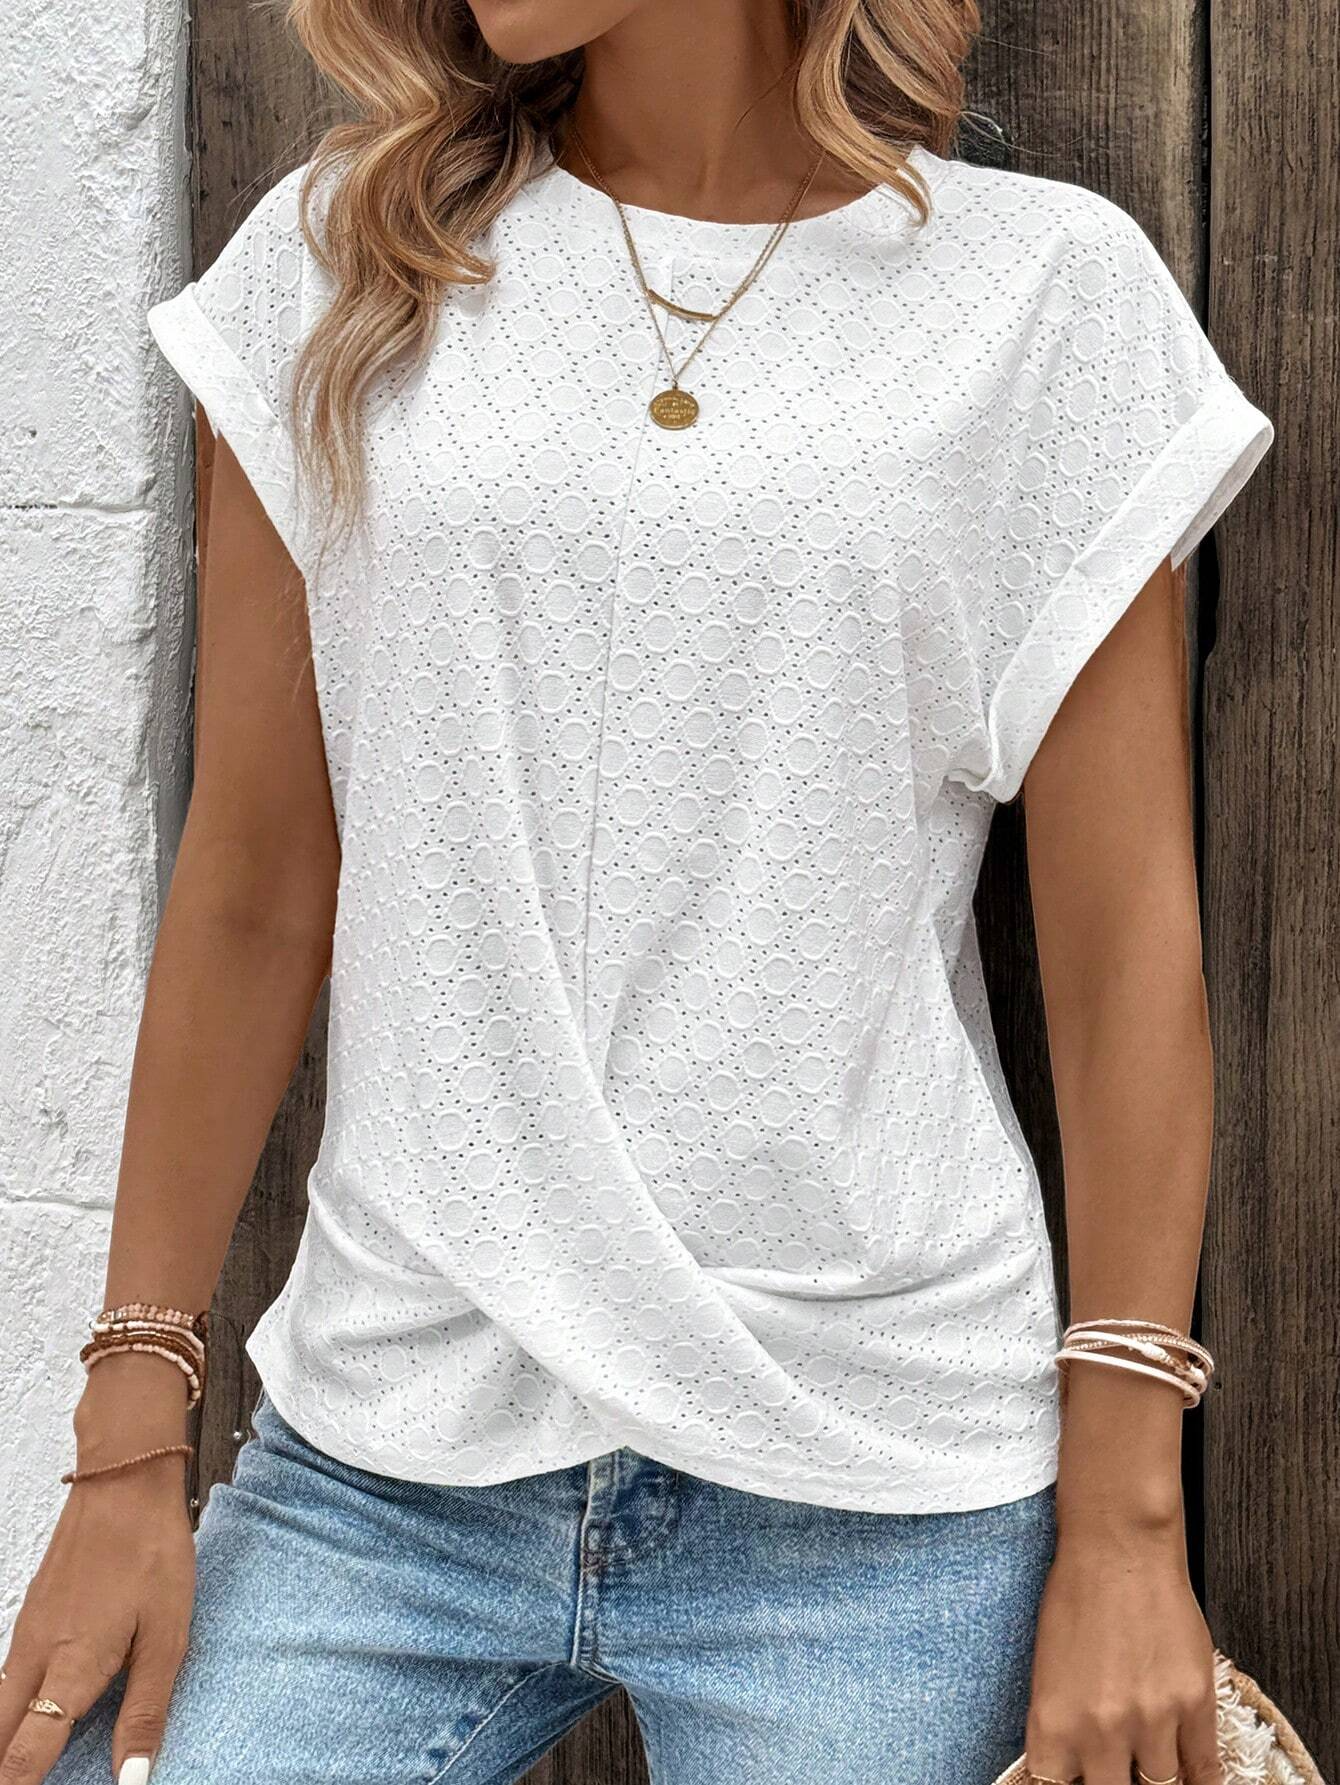 Women's Short Sleeve Shirt Summer White Plain Knot Front Cotton-Blend Crew Neck Daily Going Out Casual Top